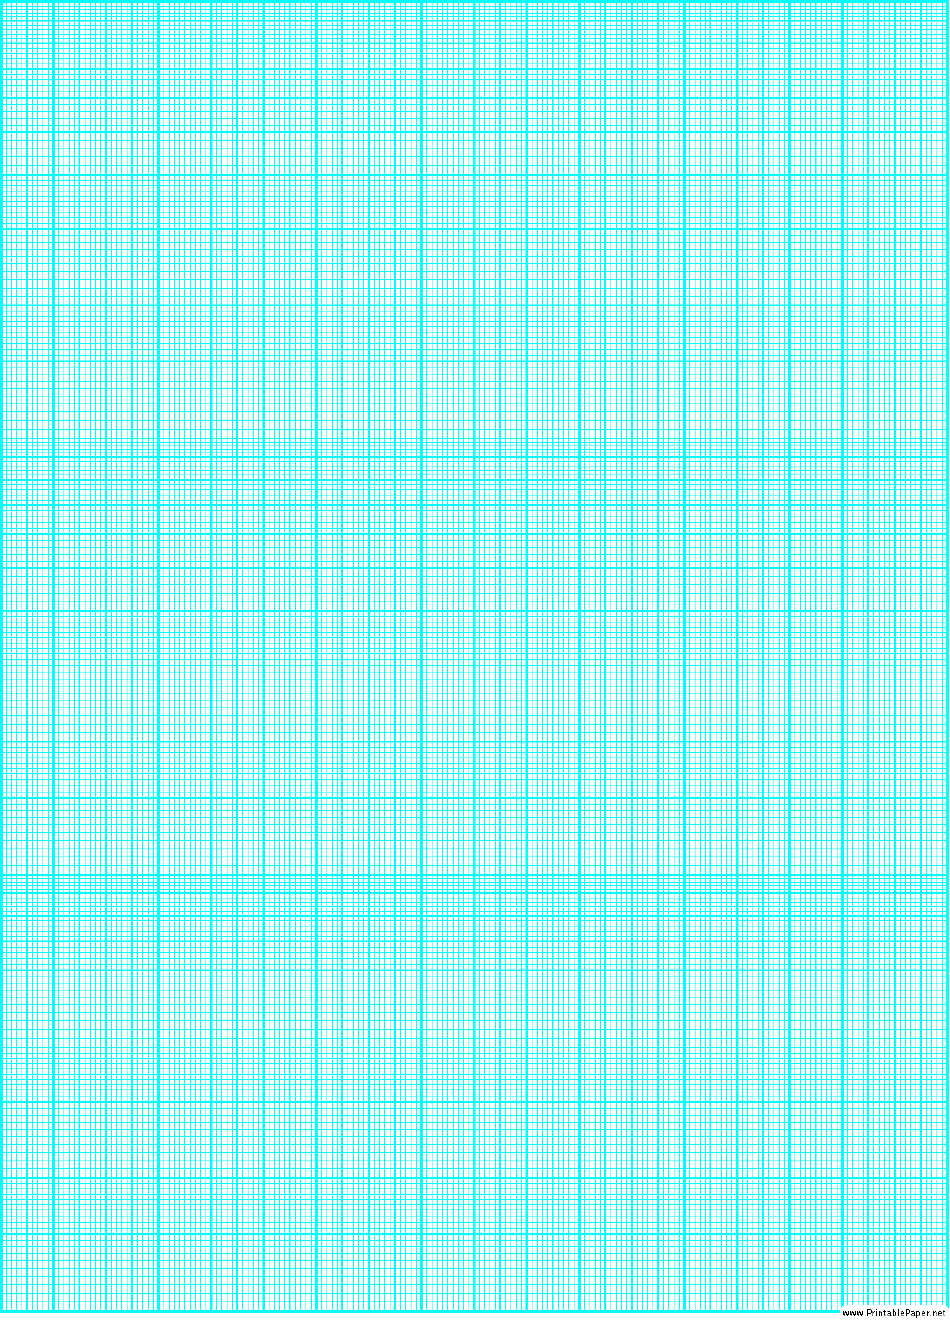 Cyan Semi-log Paper Template With 36 Divisions by 3-cycles